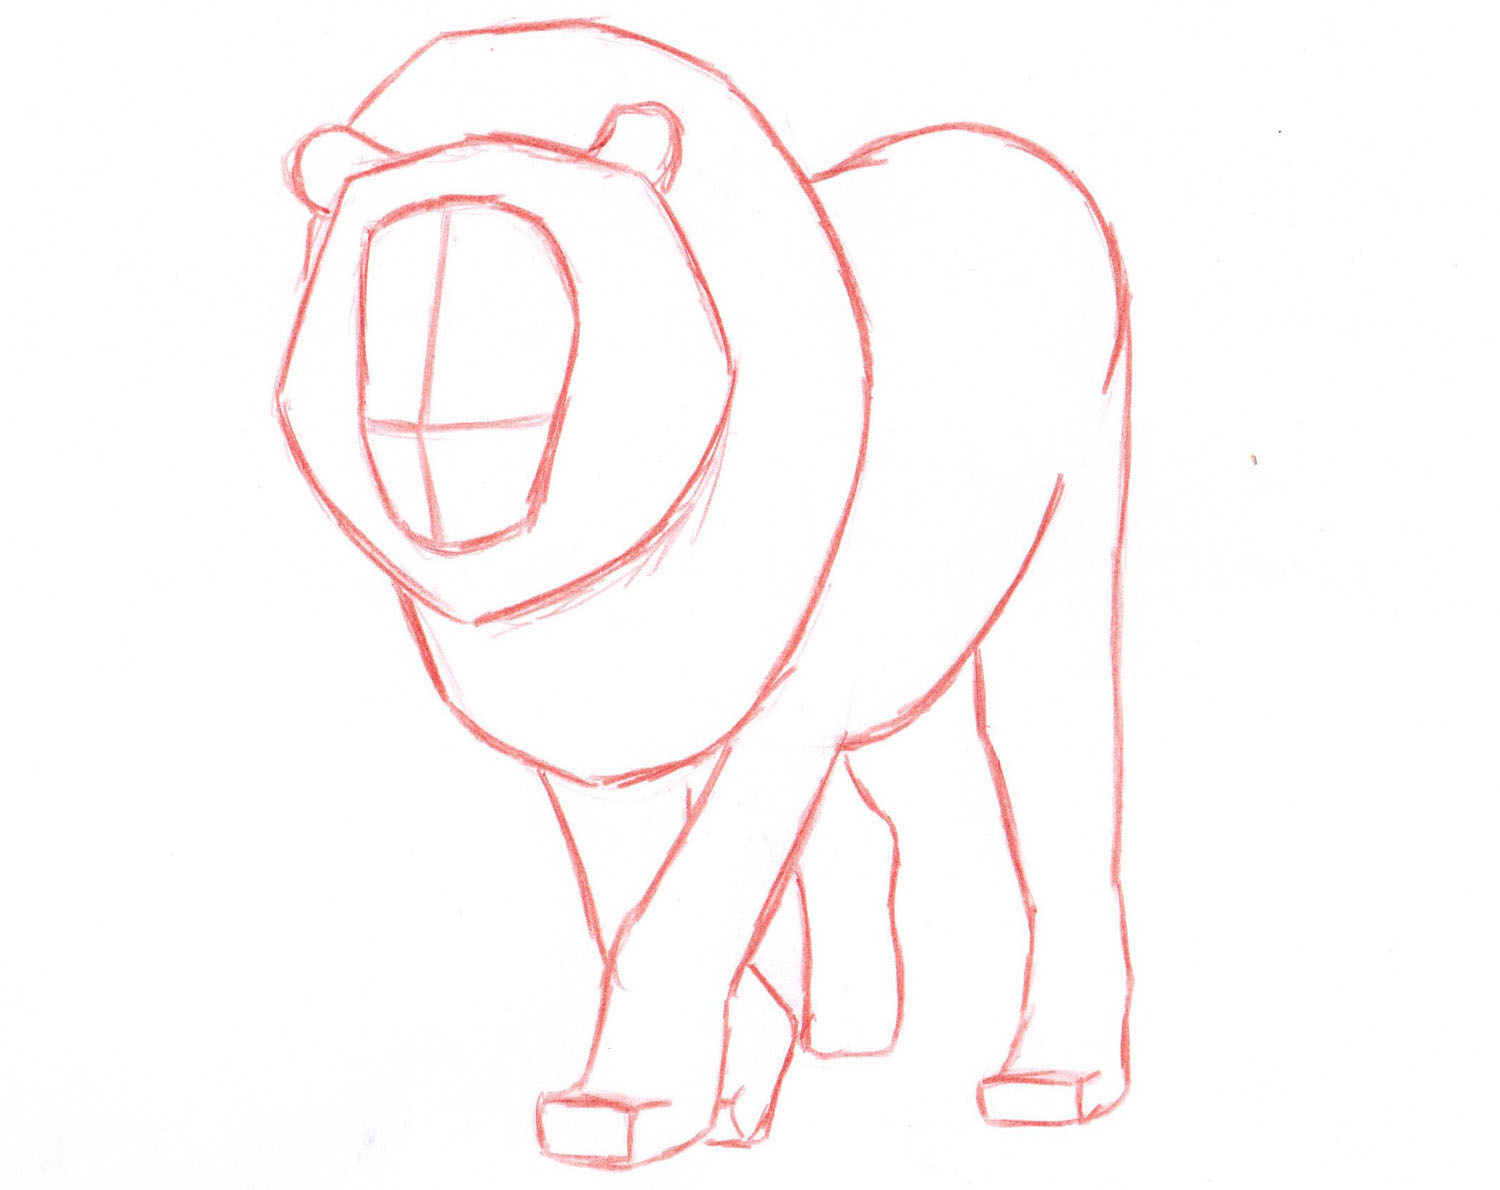 how to draw a lion head step by step easy